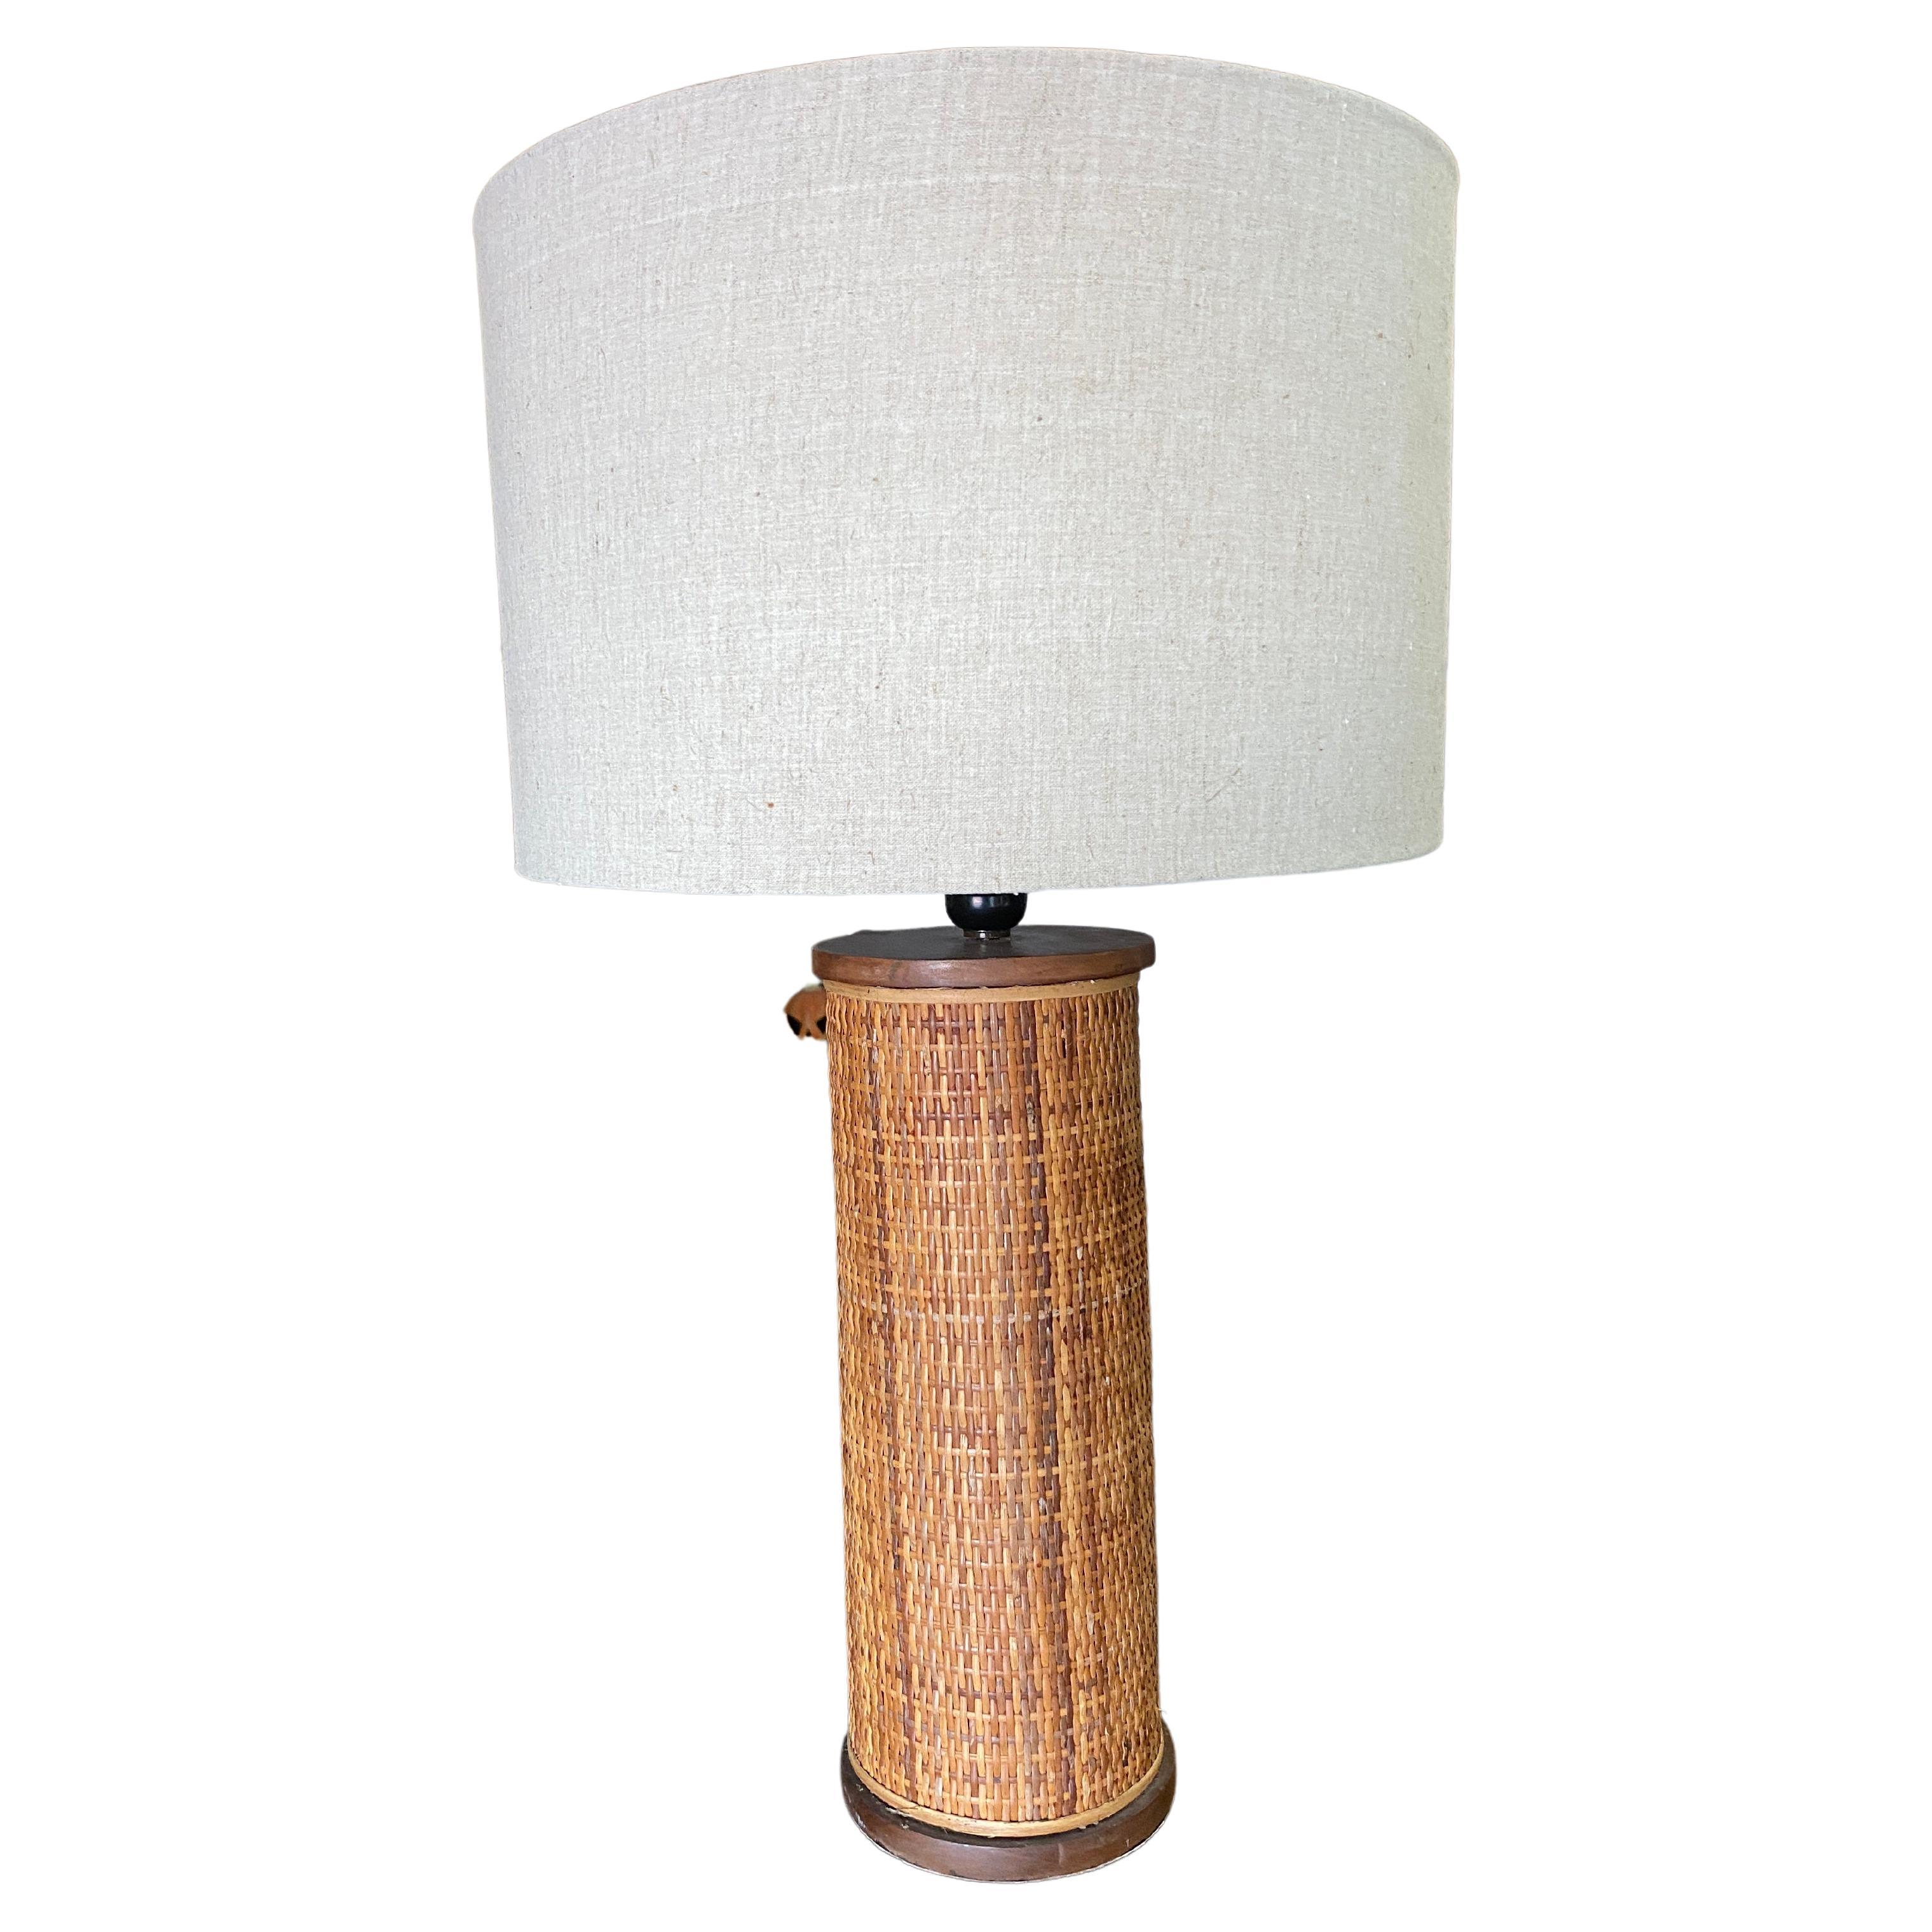 Modernist Tropical Cylinder Lamp with Woven Wicker Sides